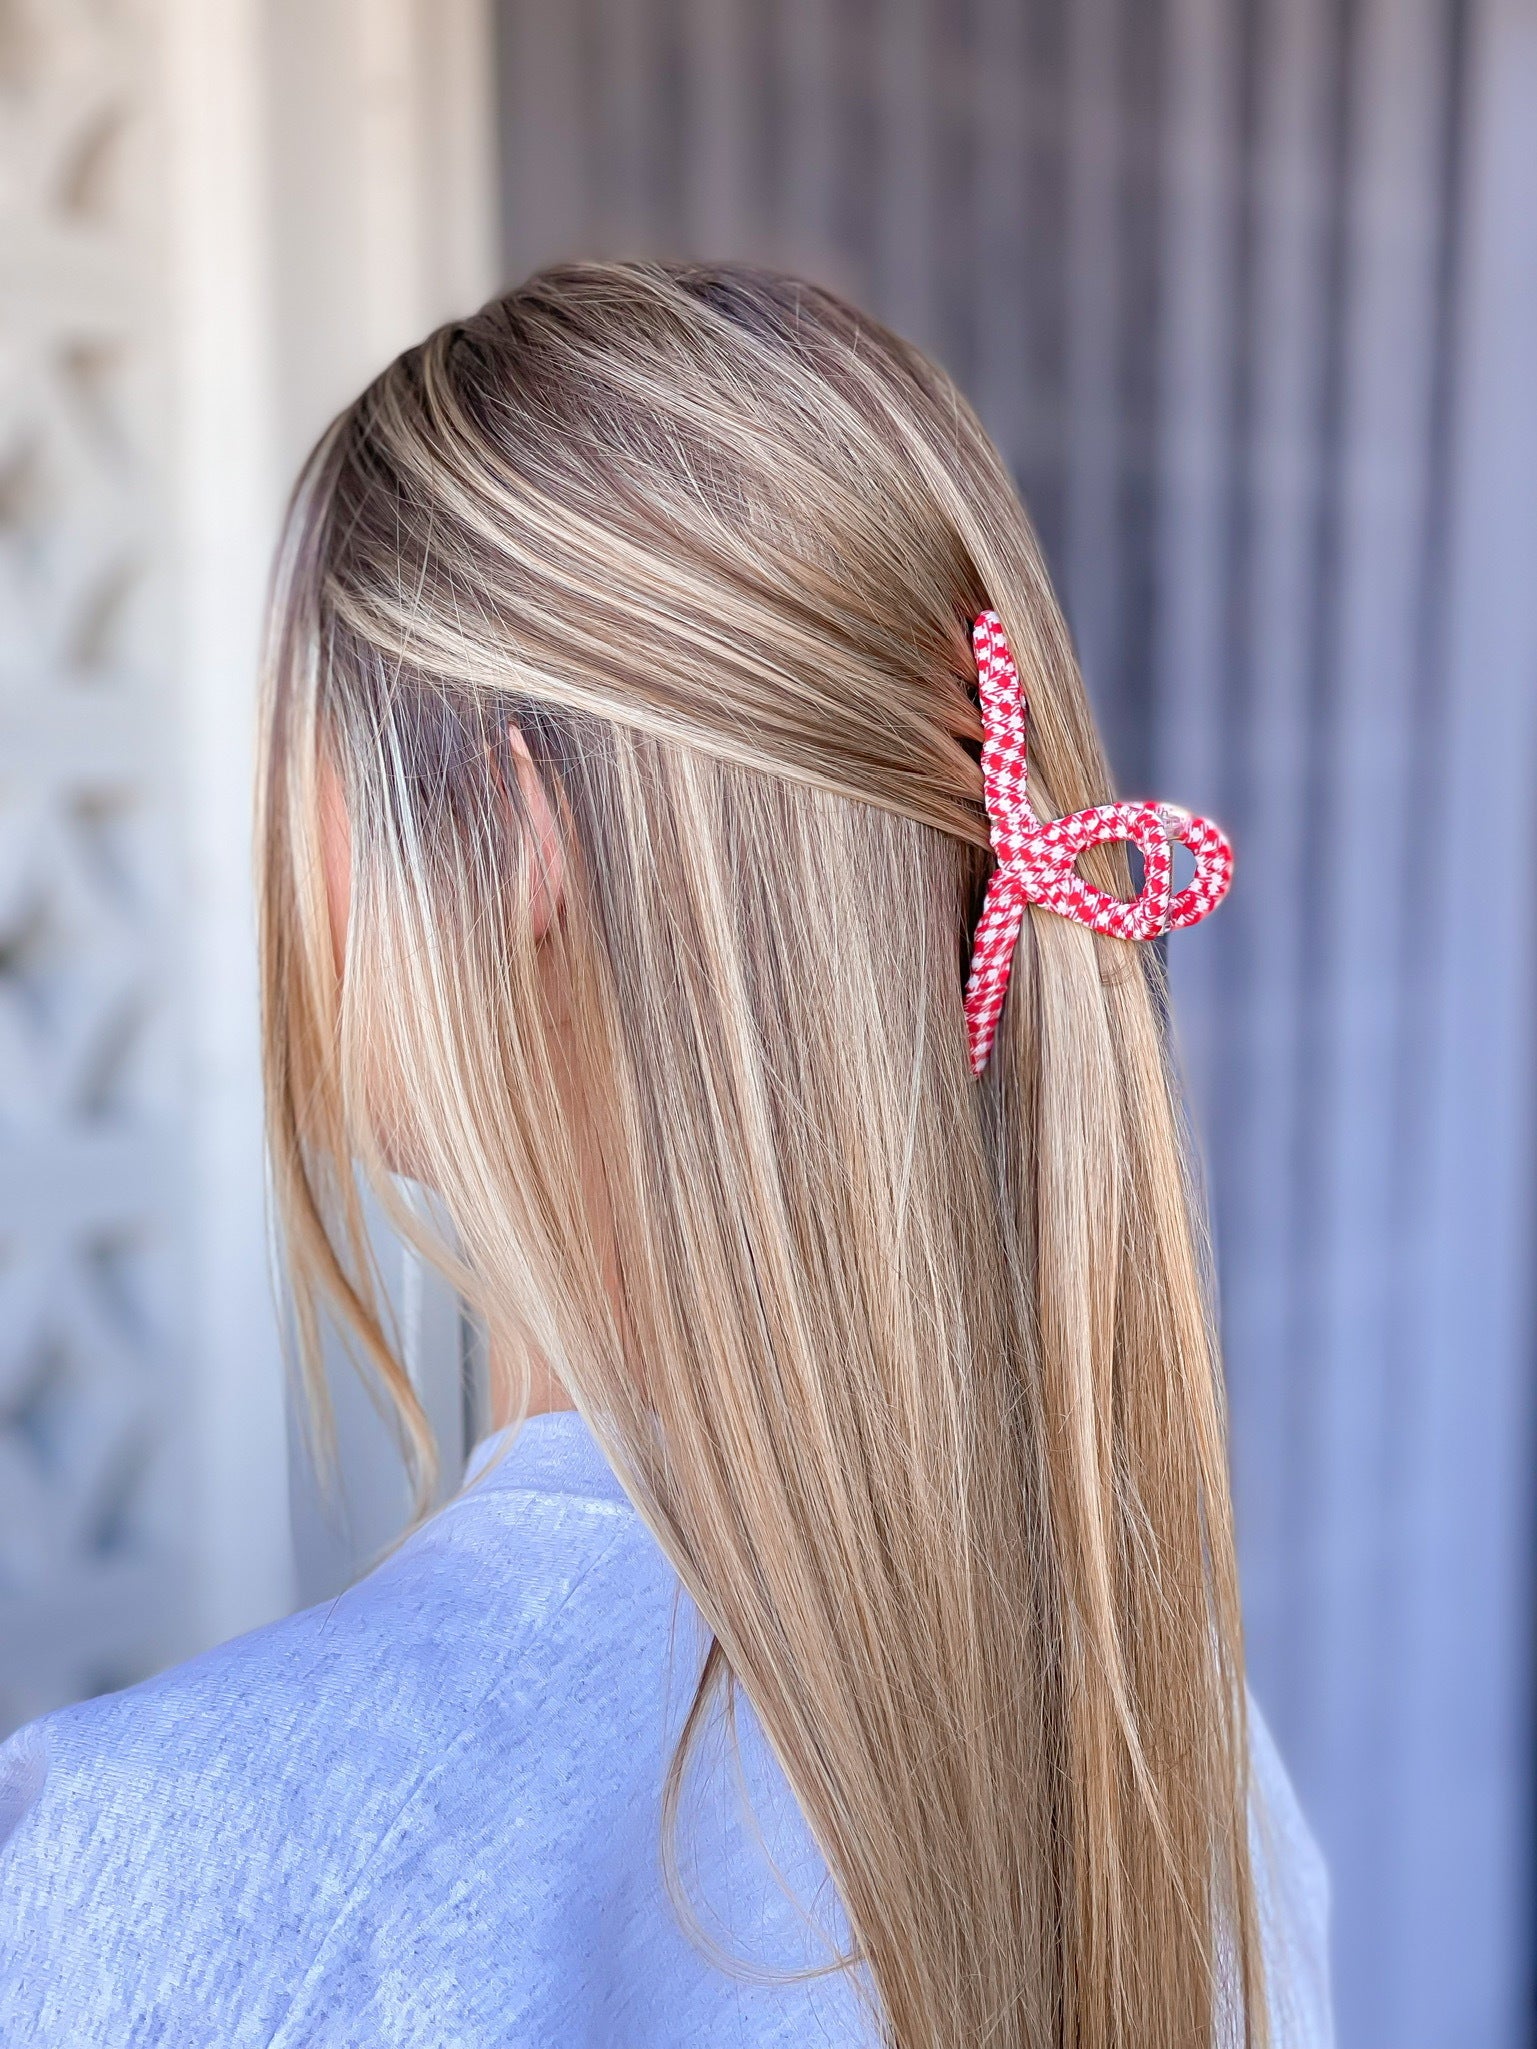 Gingham Claw Hair Clip - Red